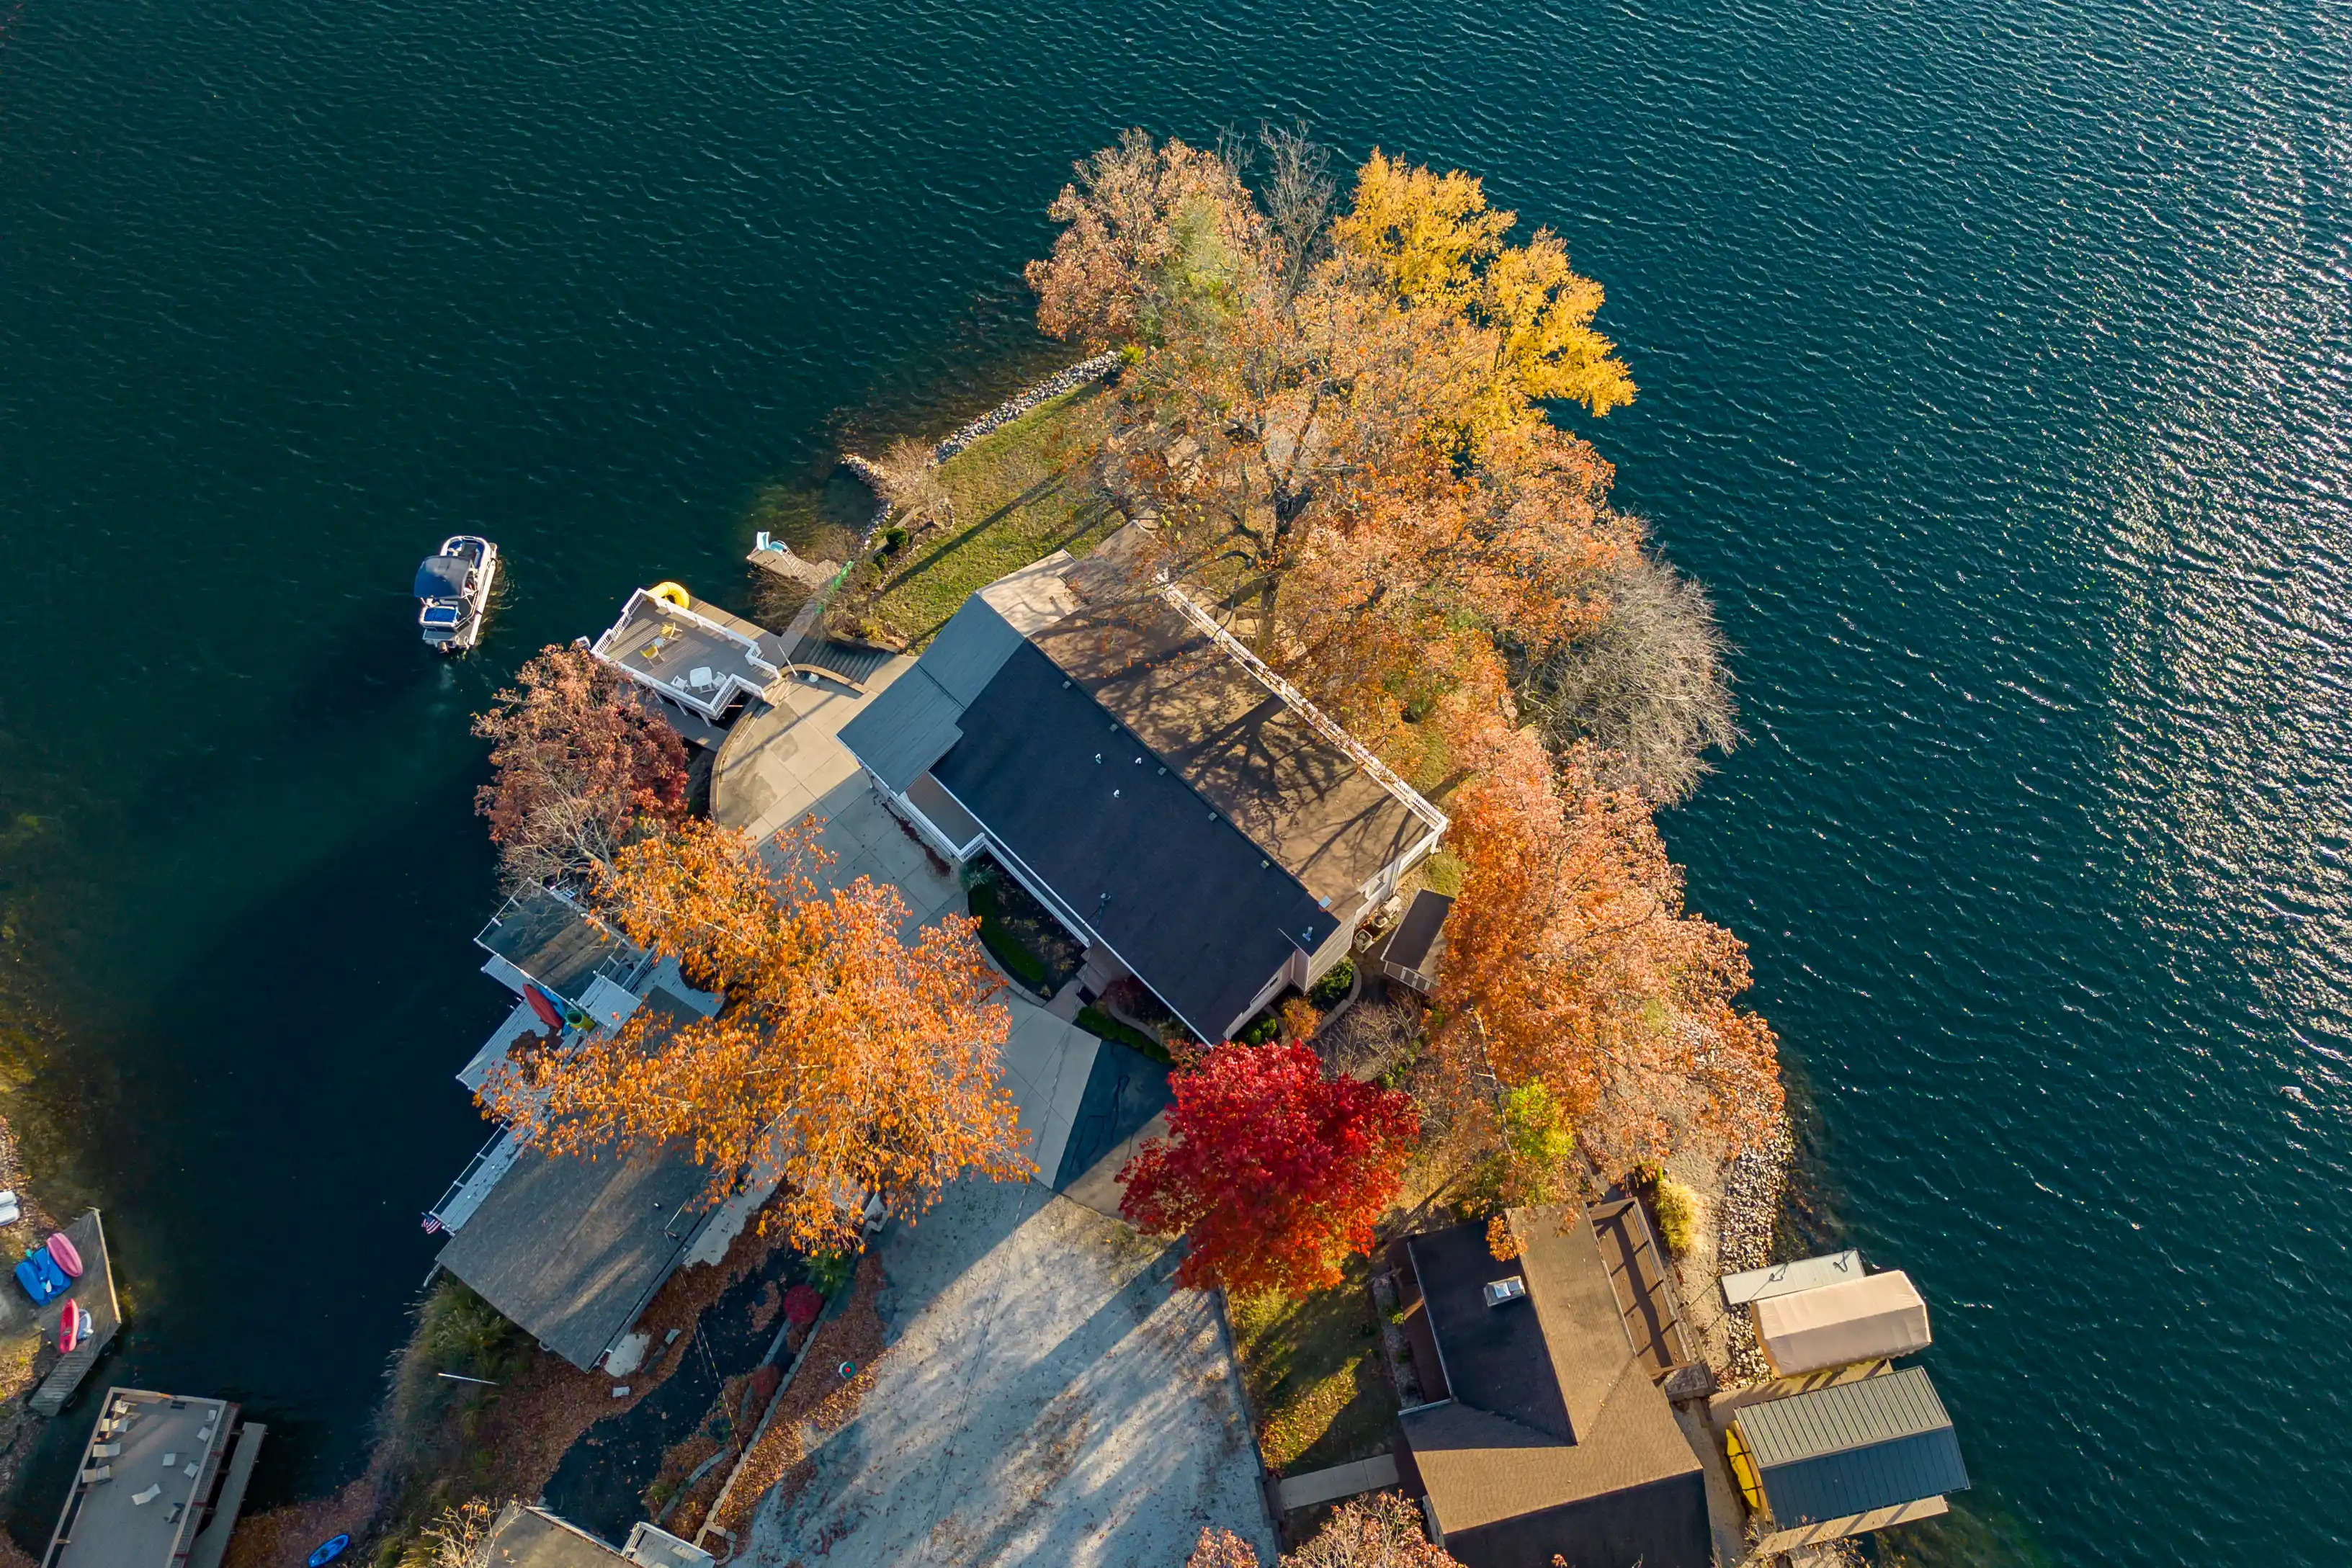 Aerial view of a lakeside home surrounded by autumn-colored trees, with a boat docked at a pier nearby.